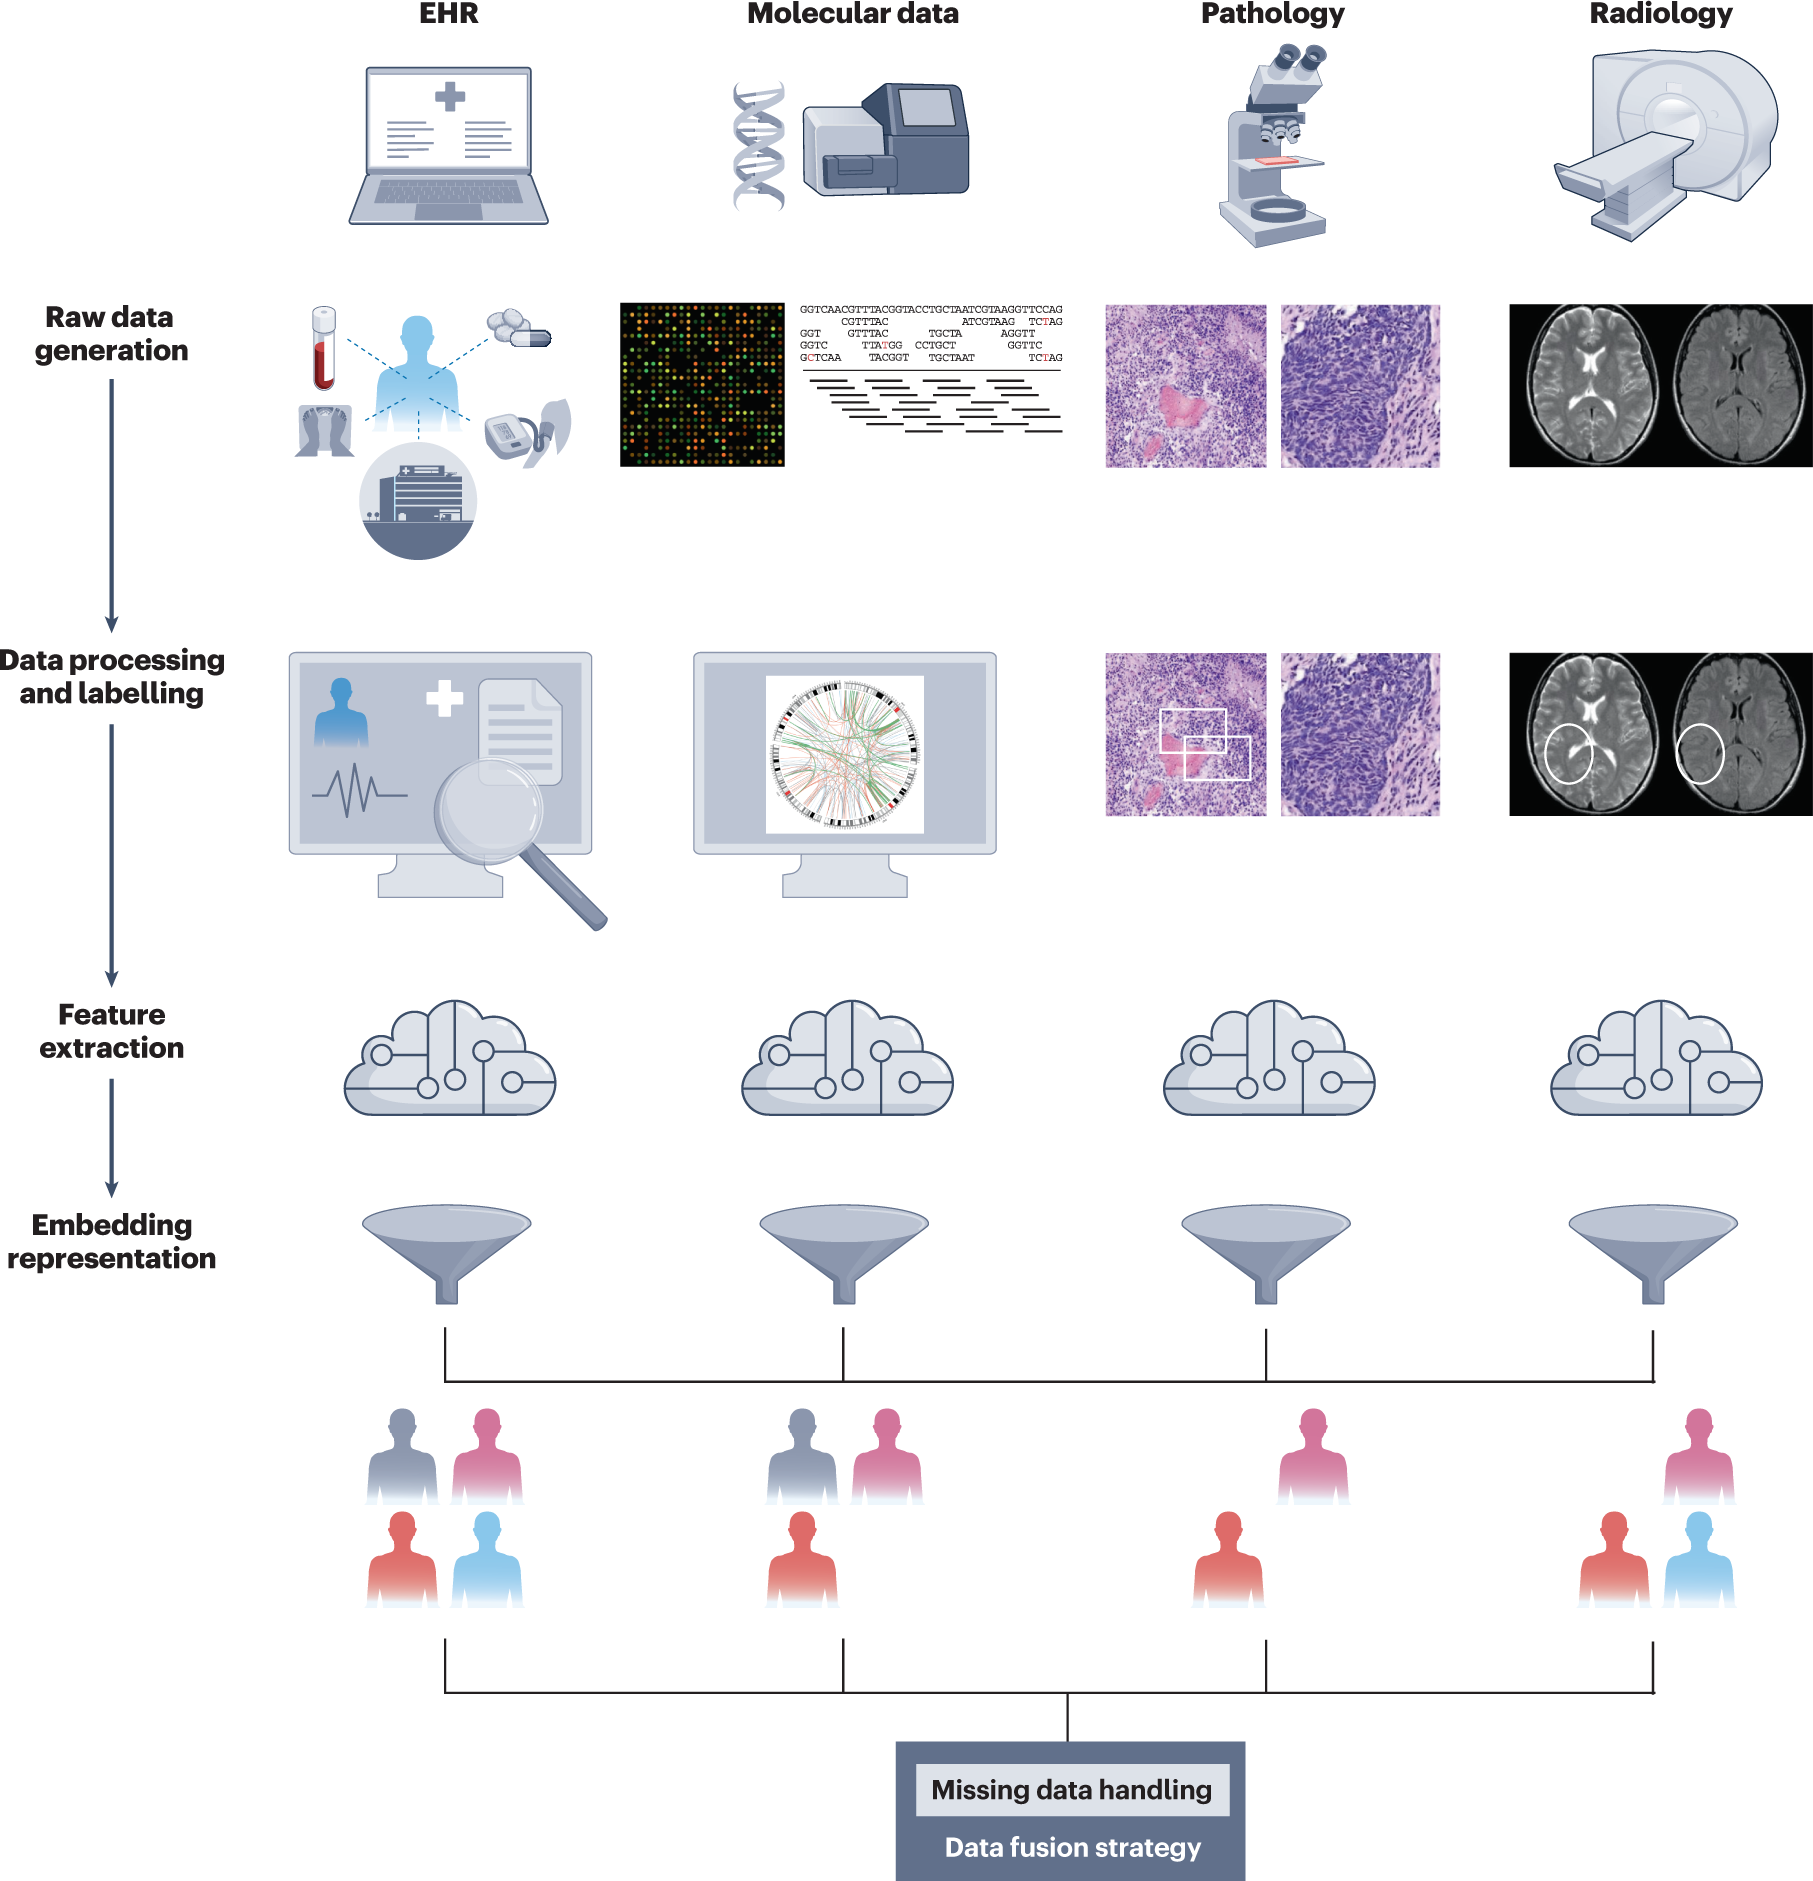 Multimodal data fusion for cancer biomarker discovery with deep learning |  Nature Machine Intelligence